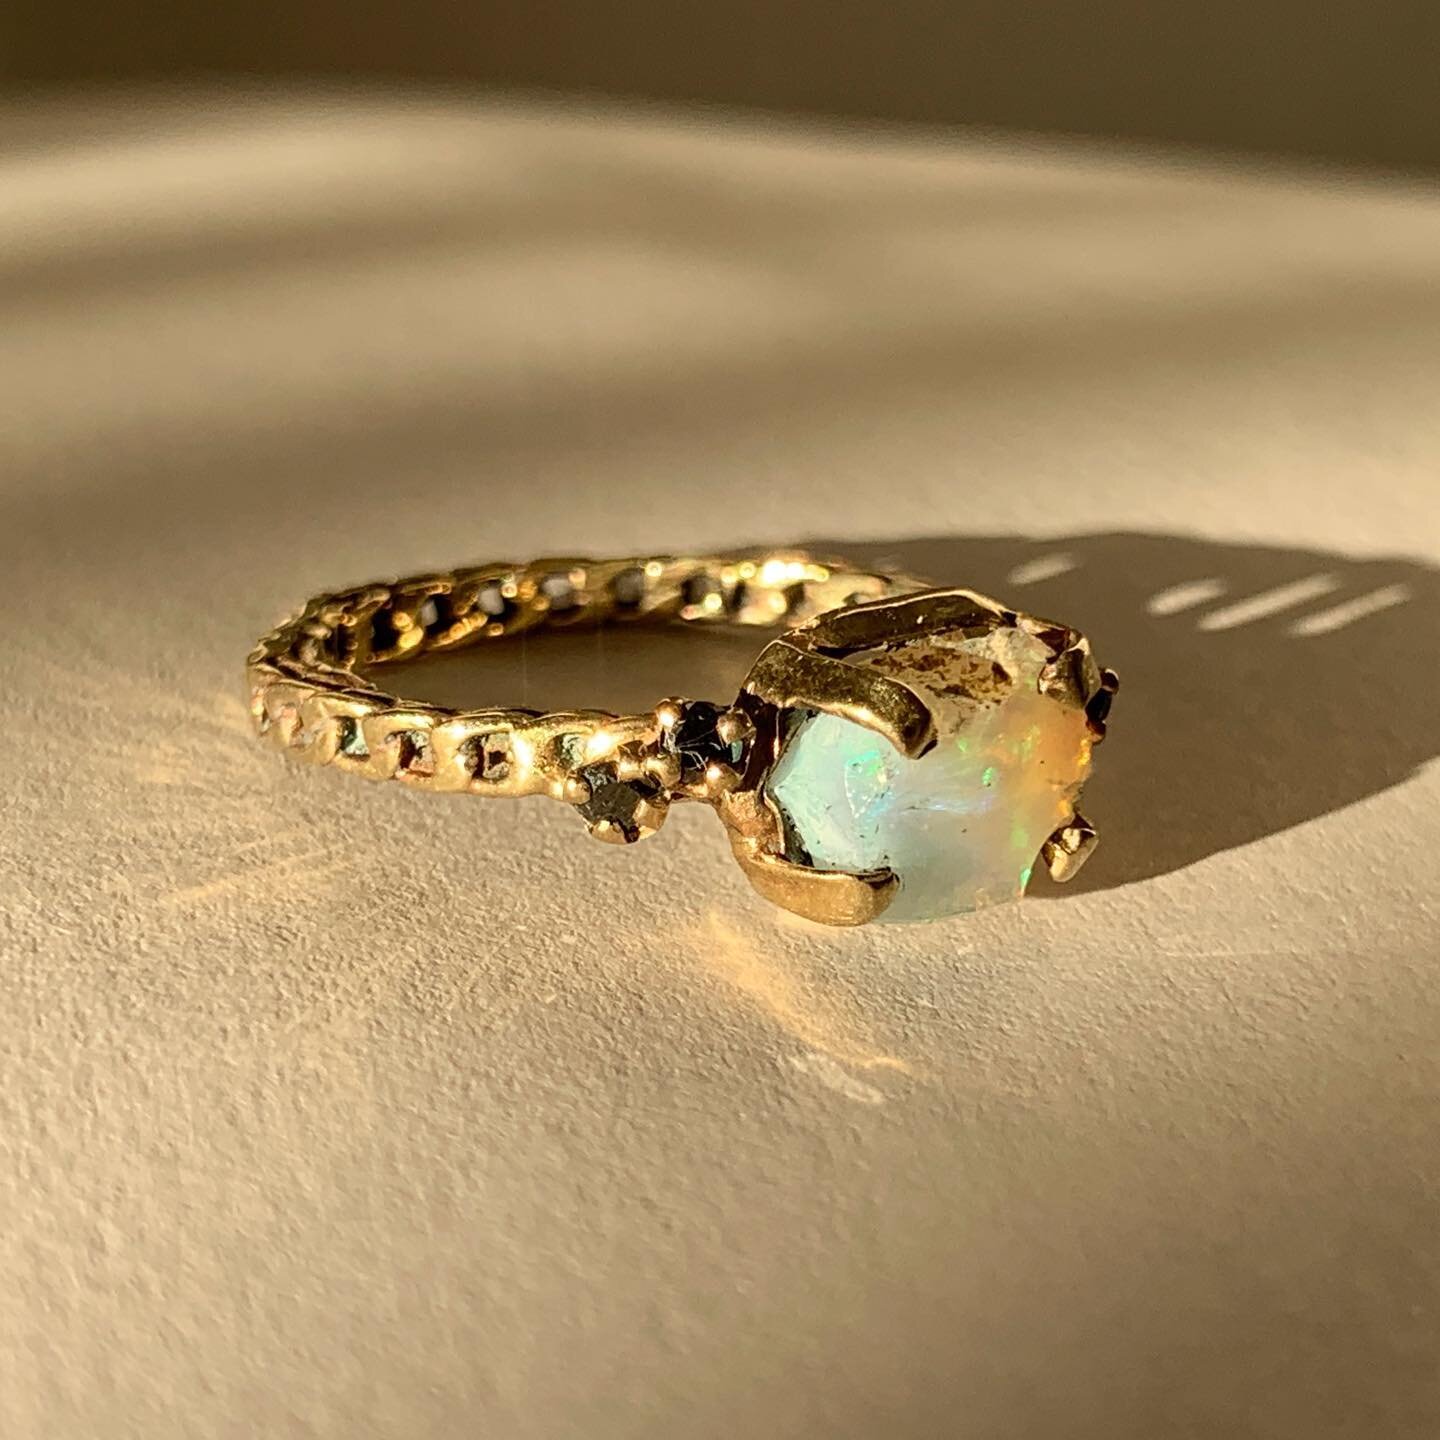 Mini Phynix ring in brass with opal and black diamonds.